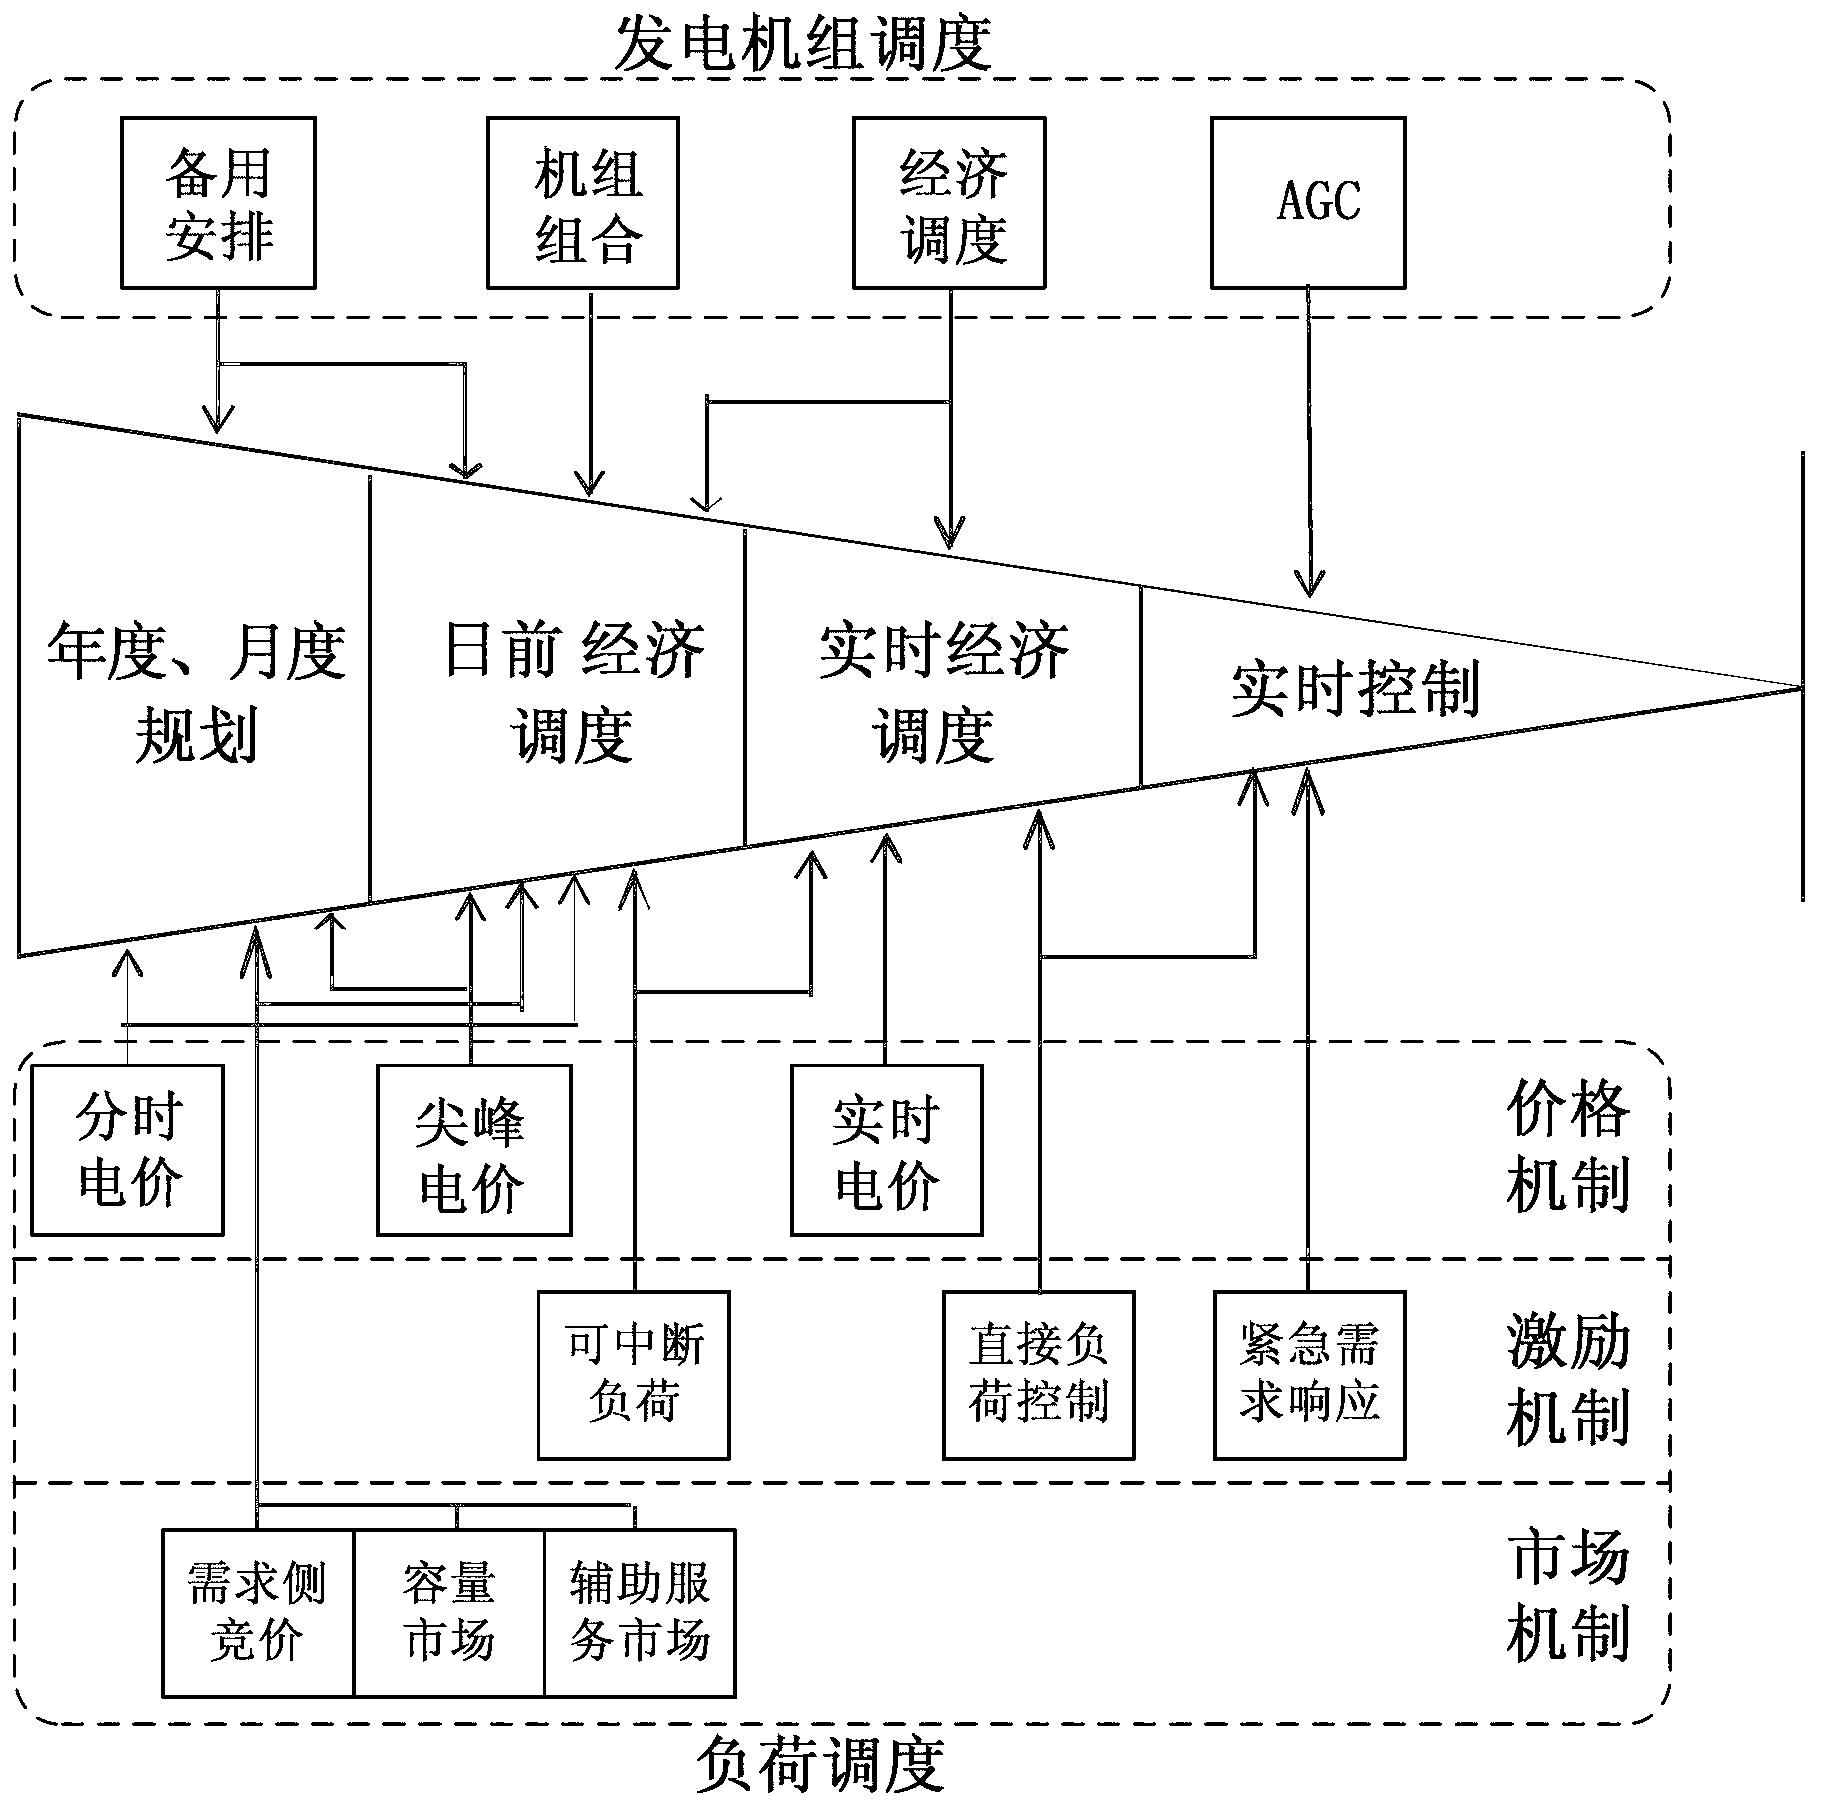 Multiple spatial and temporal scale gradually-advancing load dispatching mode designing method